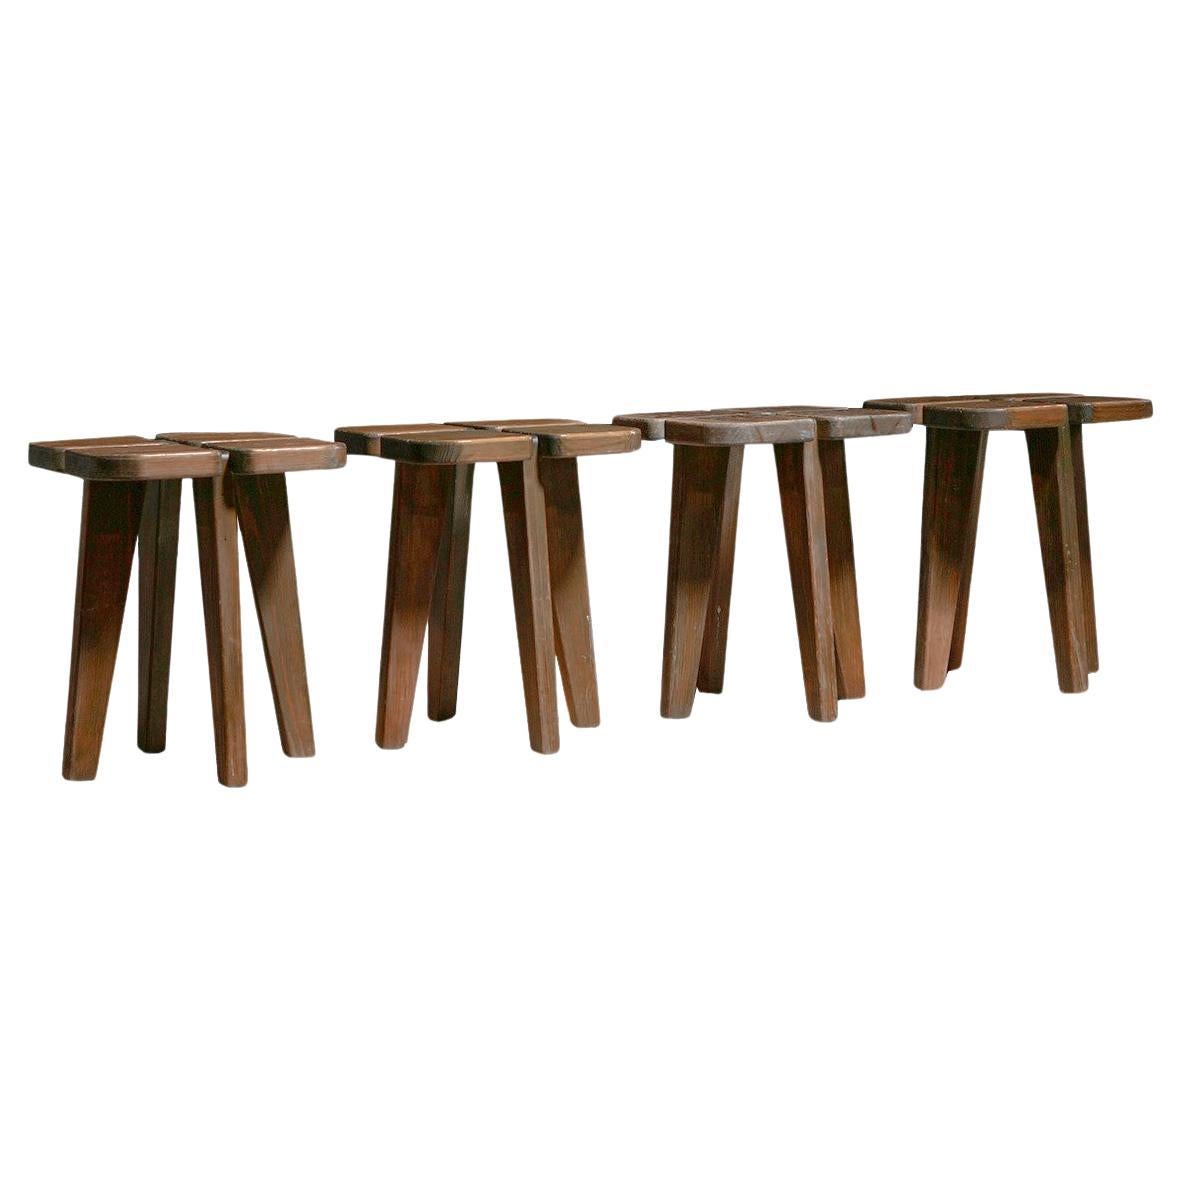 Rauni Peippo Set of Four 'Apilla' Stools in Pine, 1960s For Sale